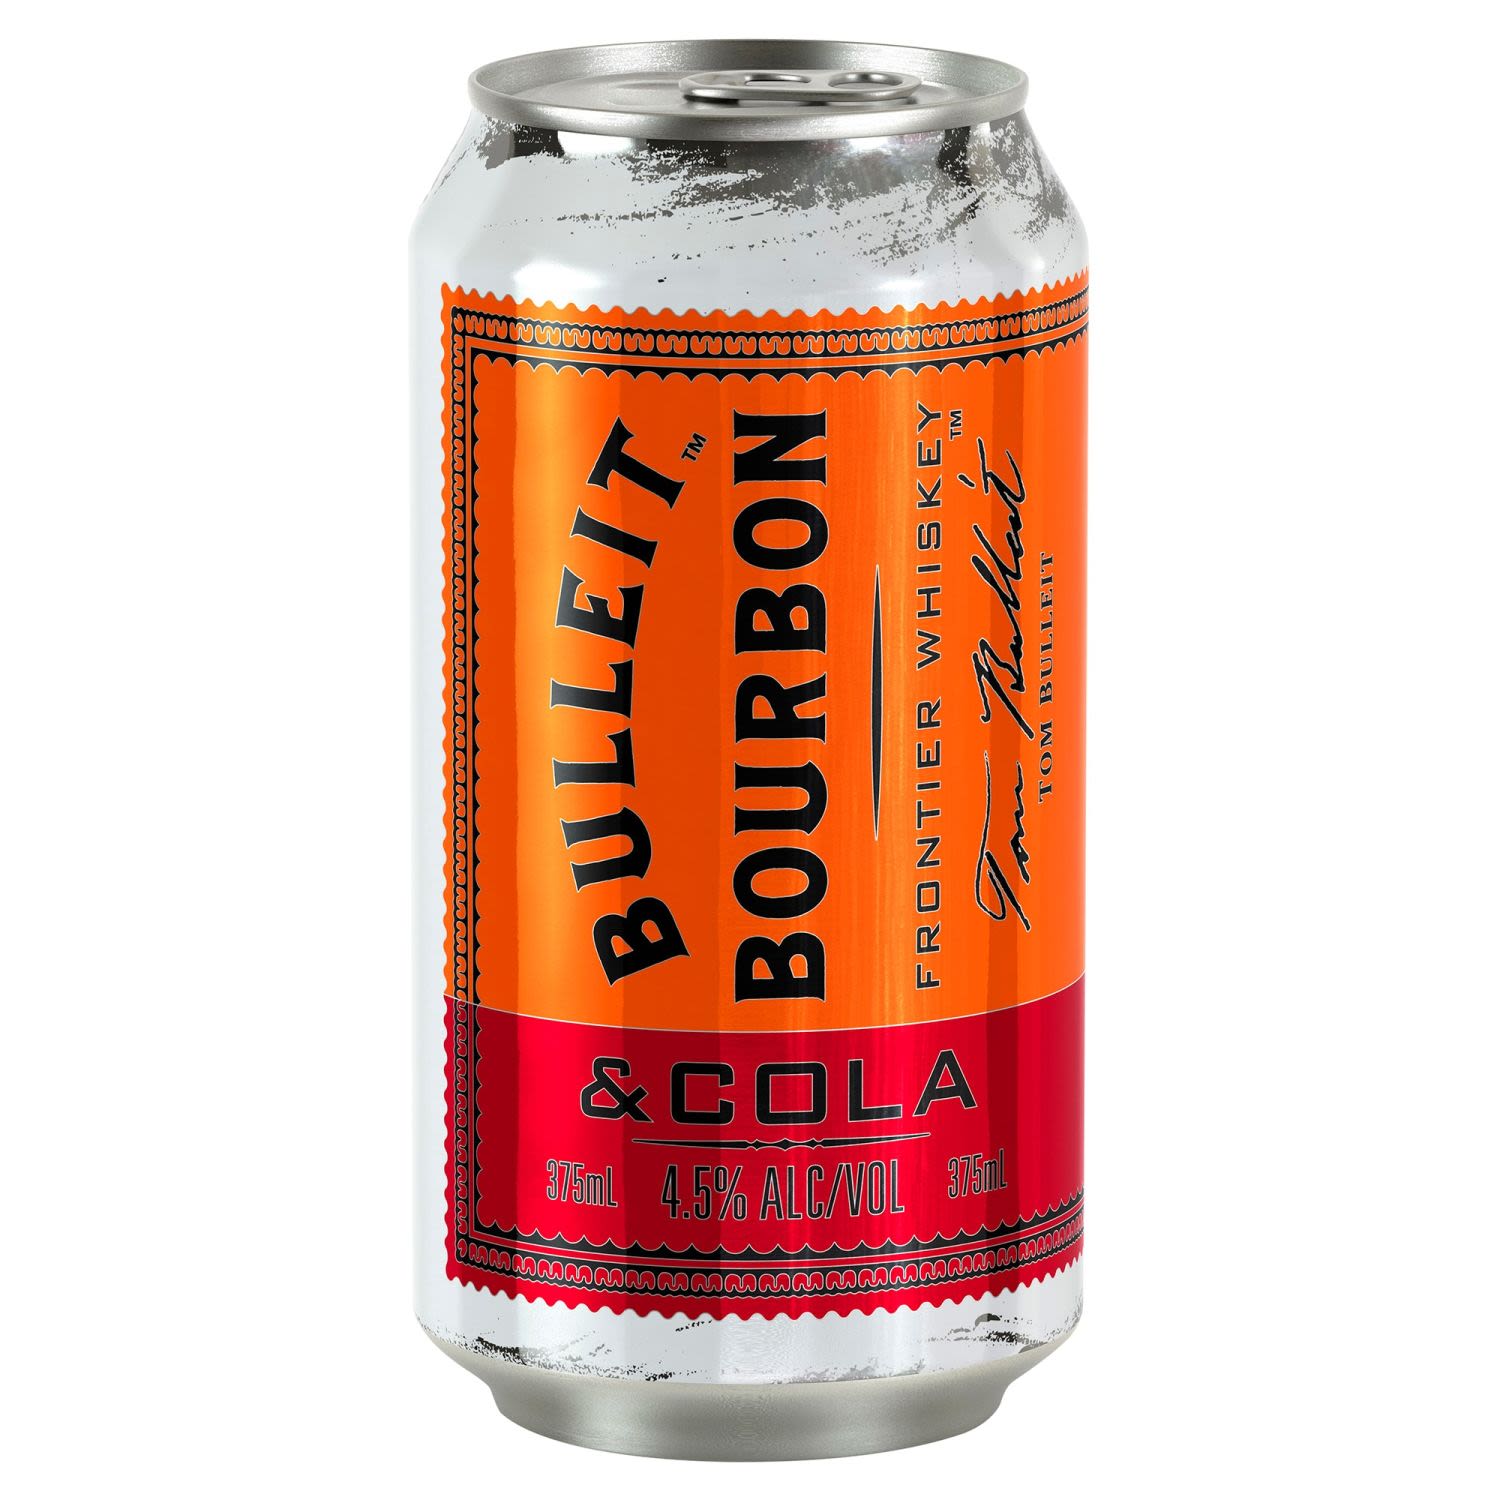 Bulleit Bourbon and Cola 4.5% Can 375mL